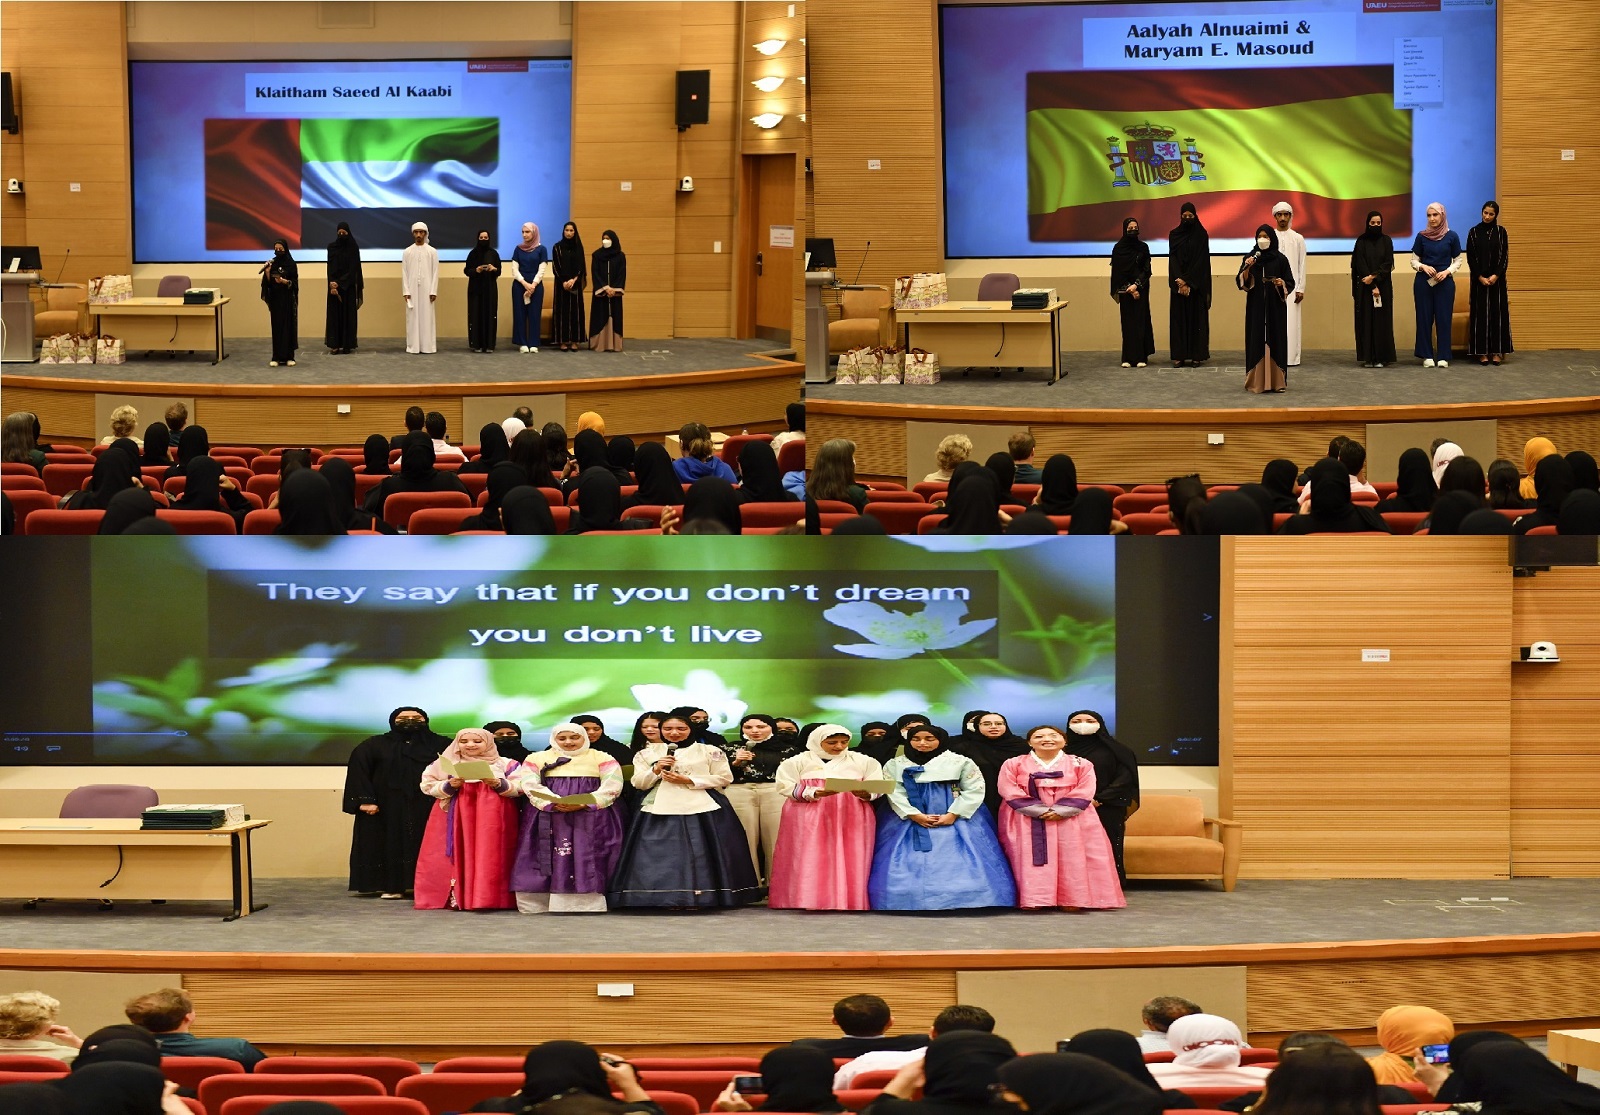 UAE University conducts several events and activities on International Translation Day